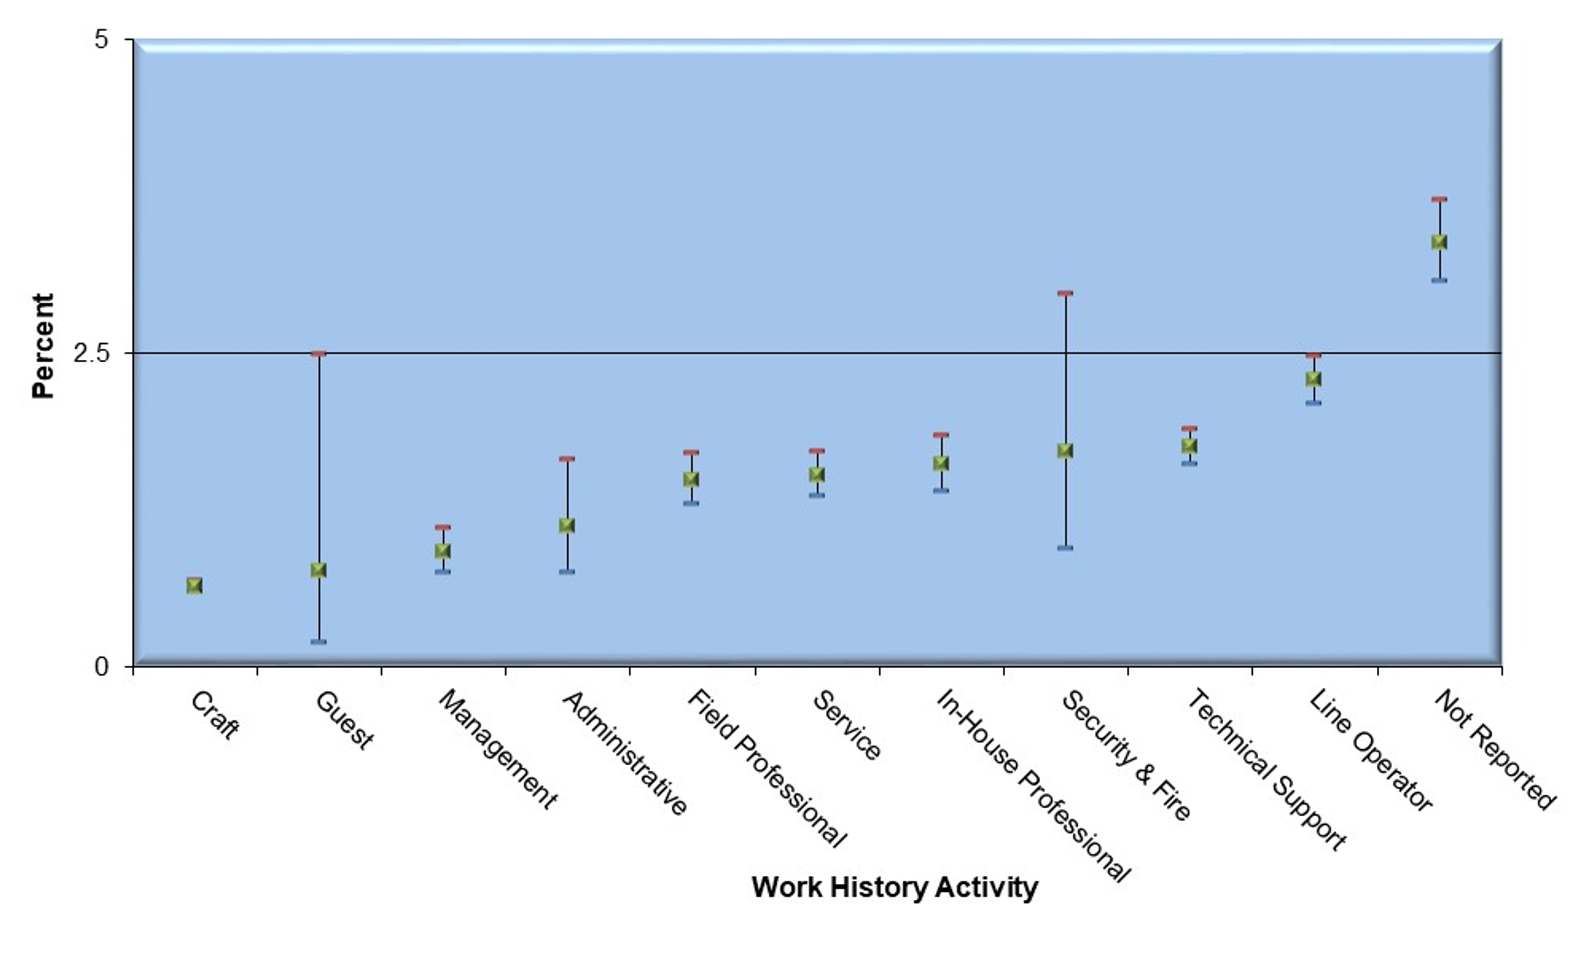 Percent of 8-hour time weighted average (TWA) Exceeding Action Level 0.2 μg/m3 by Work History Activity (2002-2019)* infographic